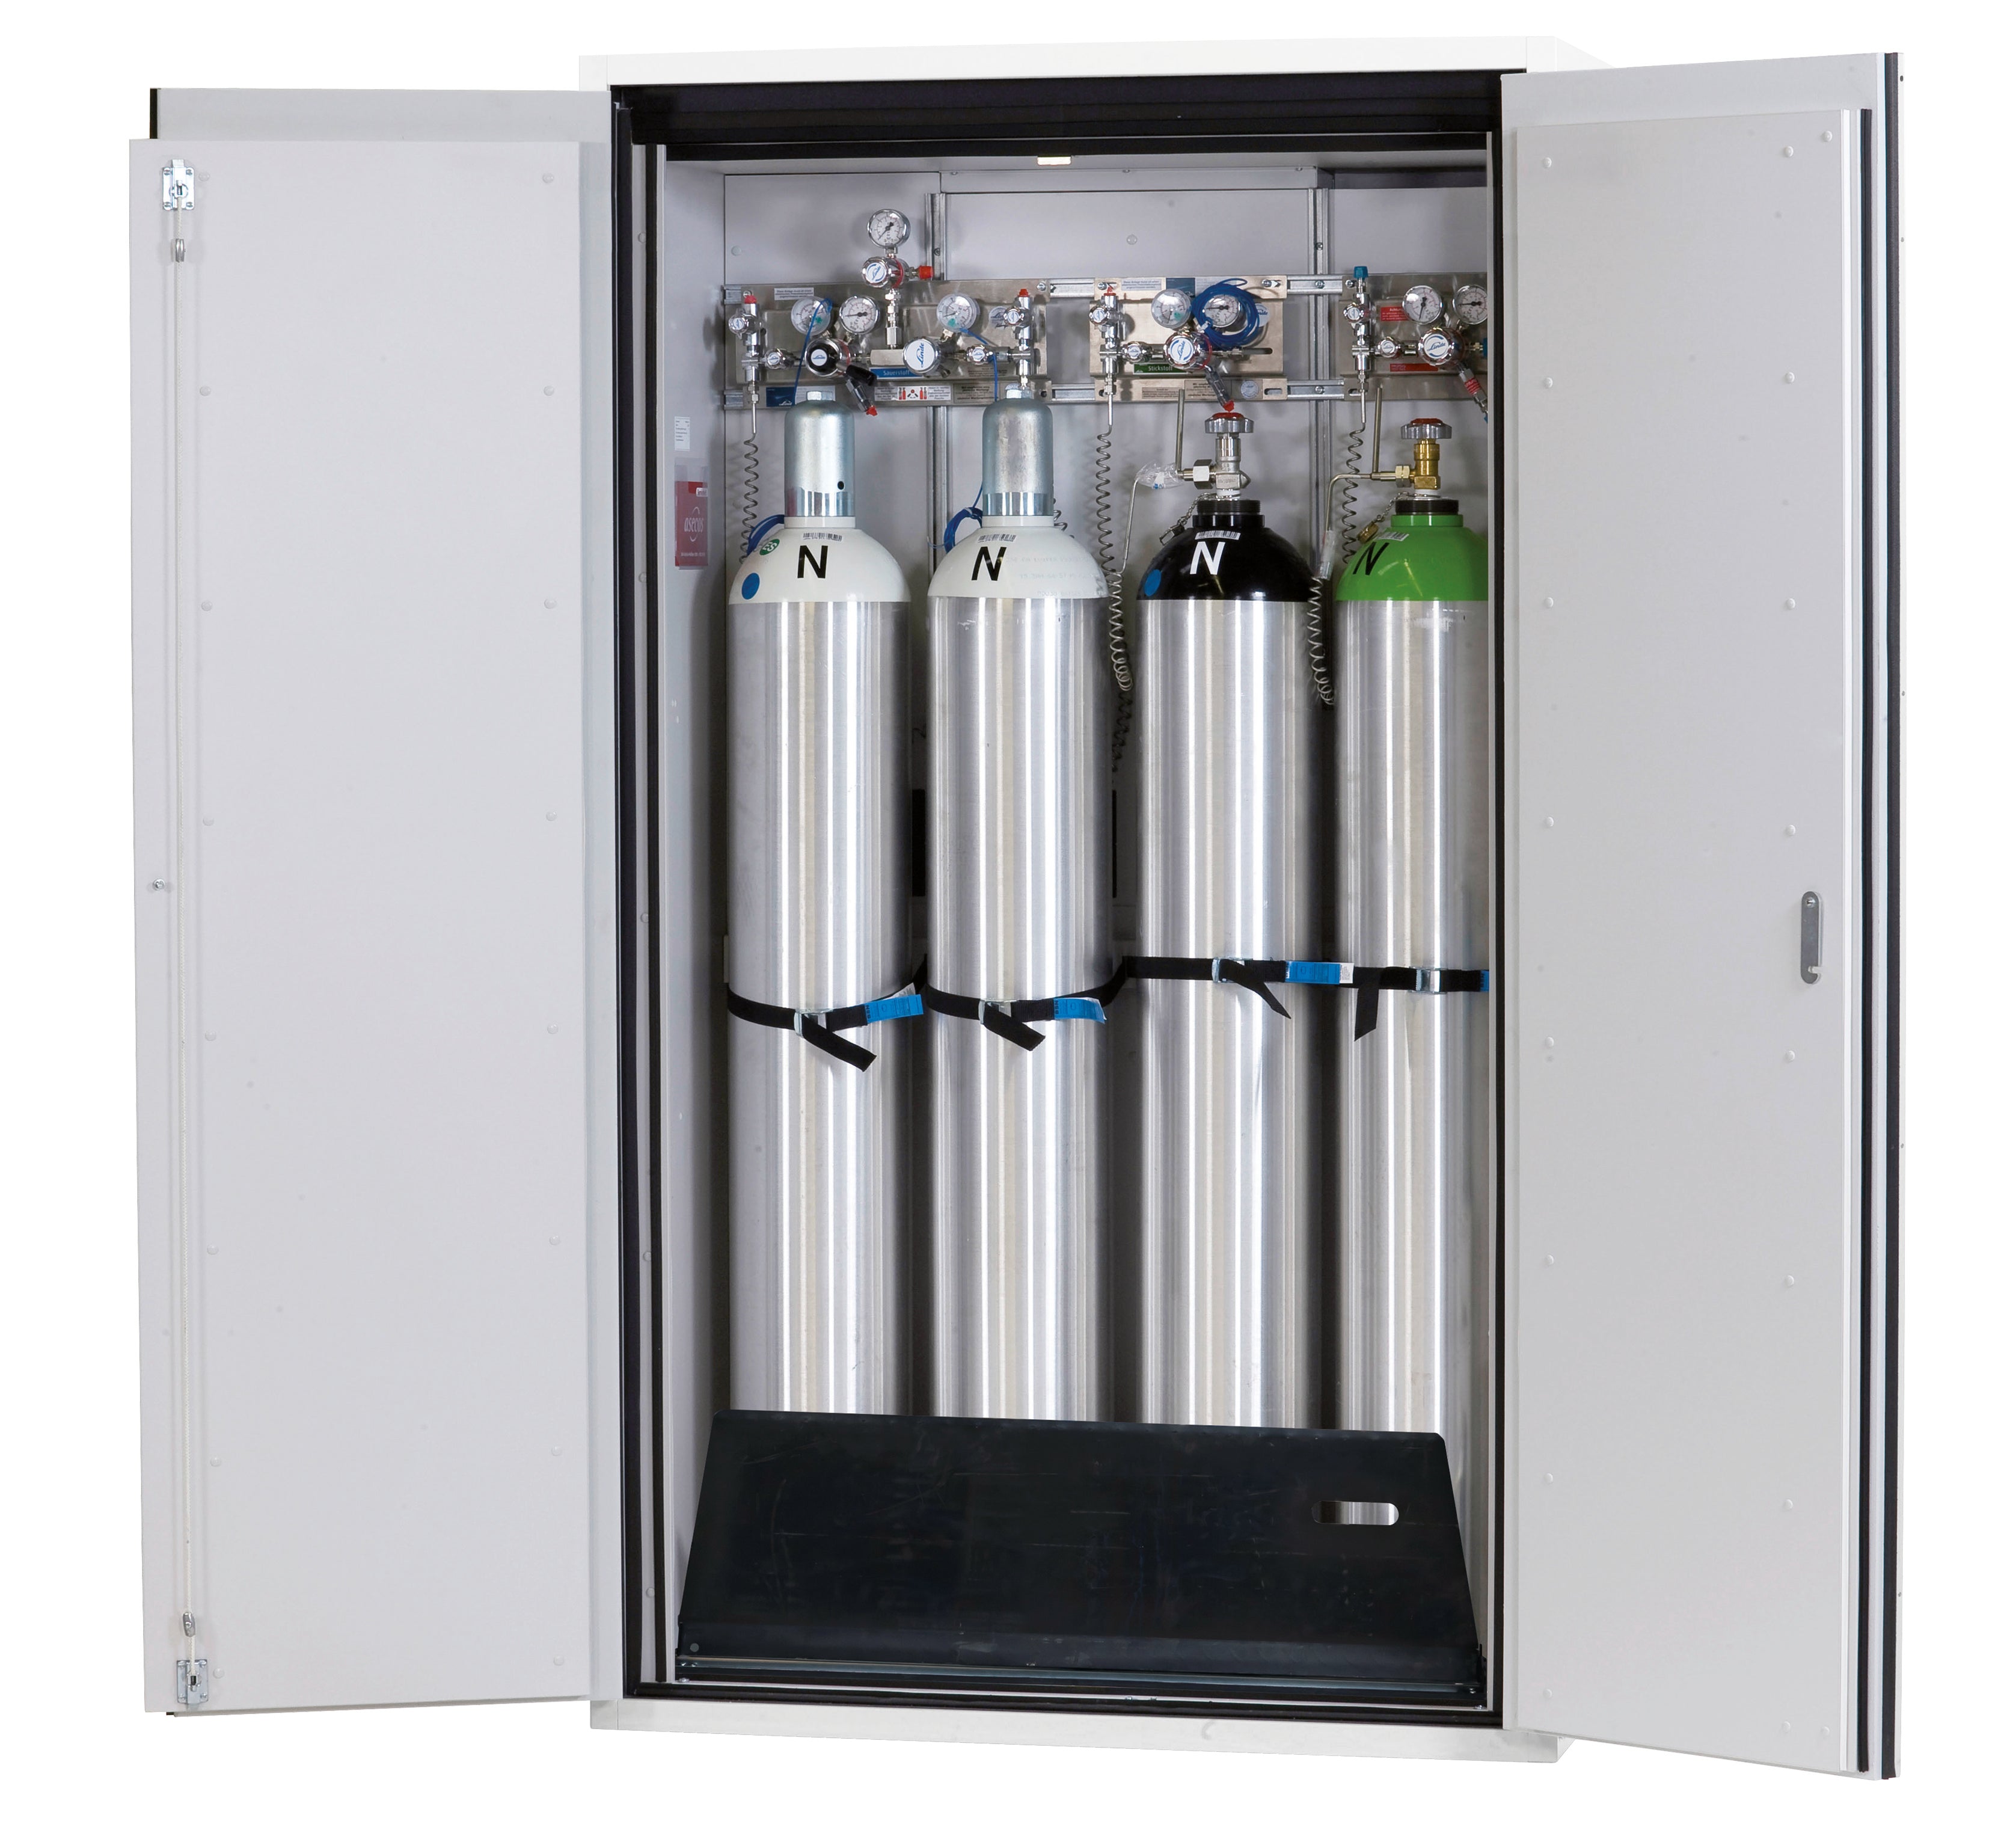 Type 90 compressed gas bottle cabinet G-ULTIMATE-90 model G90.205.120 in laboratory white (similar to RAL 9016) with standard interior fittings for 4x compressed gas bottles of 50 liters each